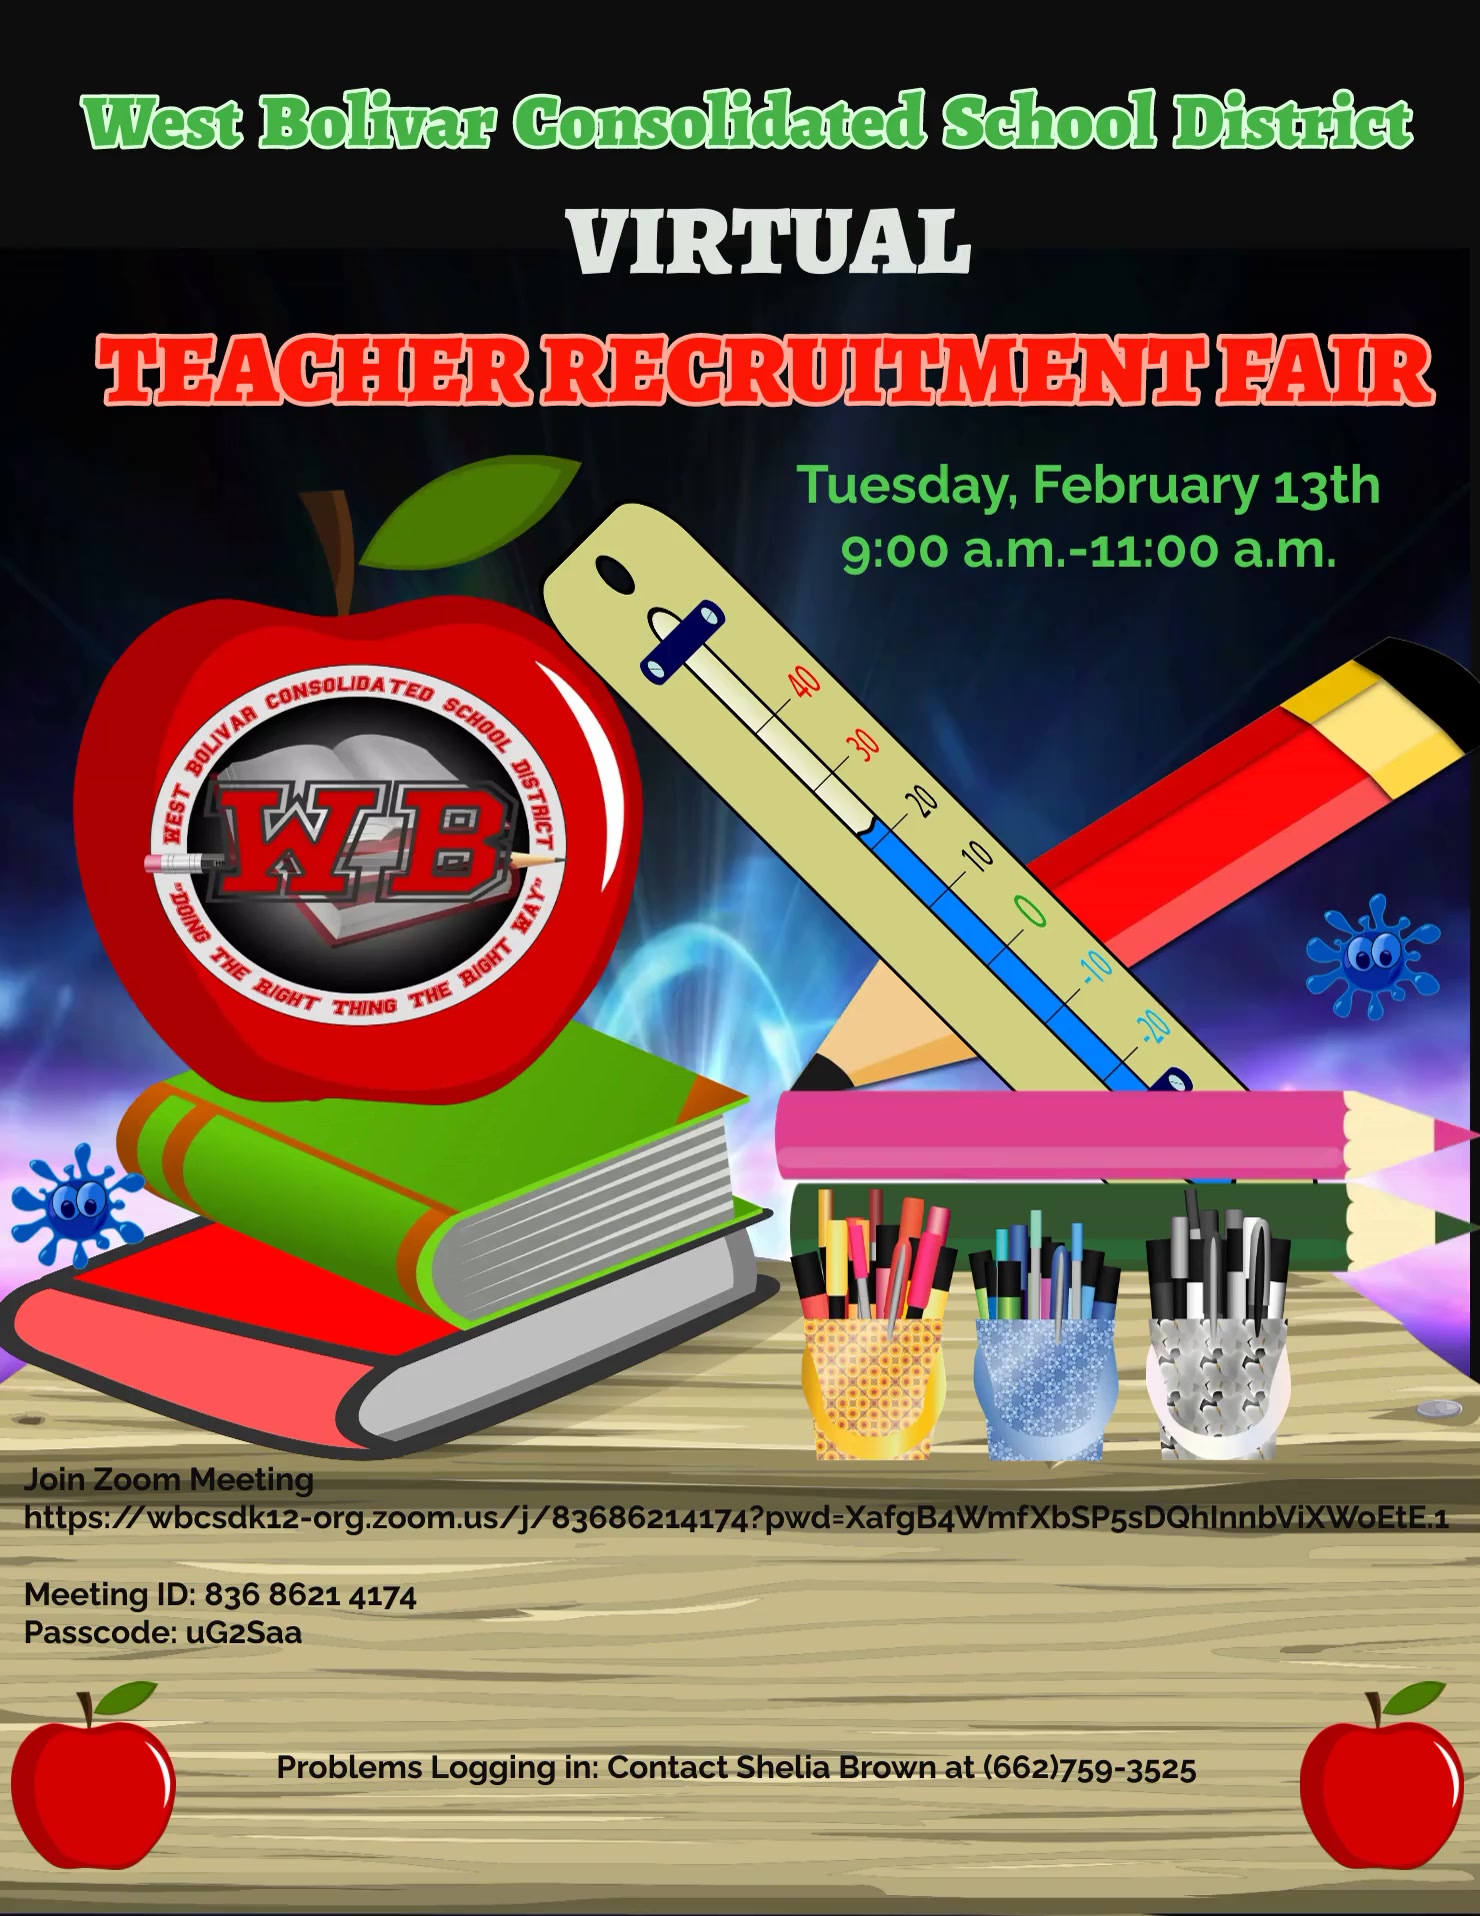 West Bolivar Consolidated School District VIRTUAL TEACHER RECRUITMENT FAIR Tuesday, February 13th 9:00 a.m.-11:00 a.m.  Join Zoom Meeting DISTRICT Meeting ID: 836 8621 4174 Passcode: uG2Saa   https://wbcsdk12-org.zoom.us/j/83686214174?pwd=XafgB4WmfXbSP5sDQhInnbViXWoEtE.1 Problems Logging in: Contact Shelia Brown at (662)759-3525